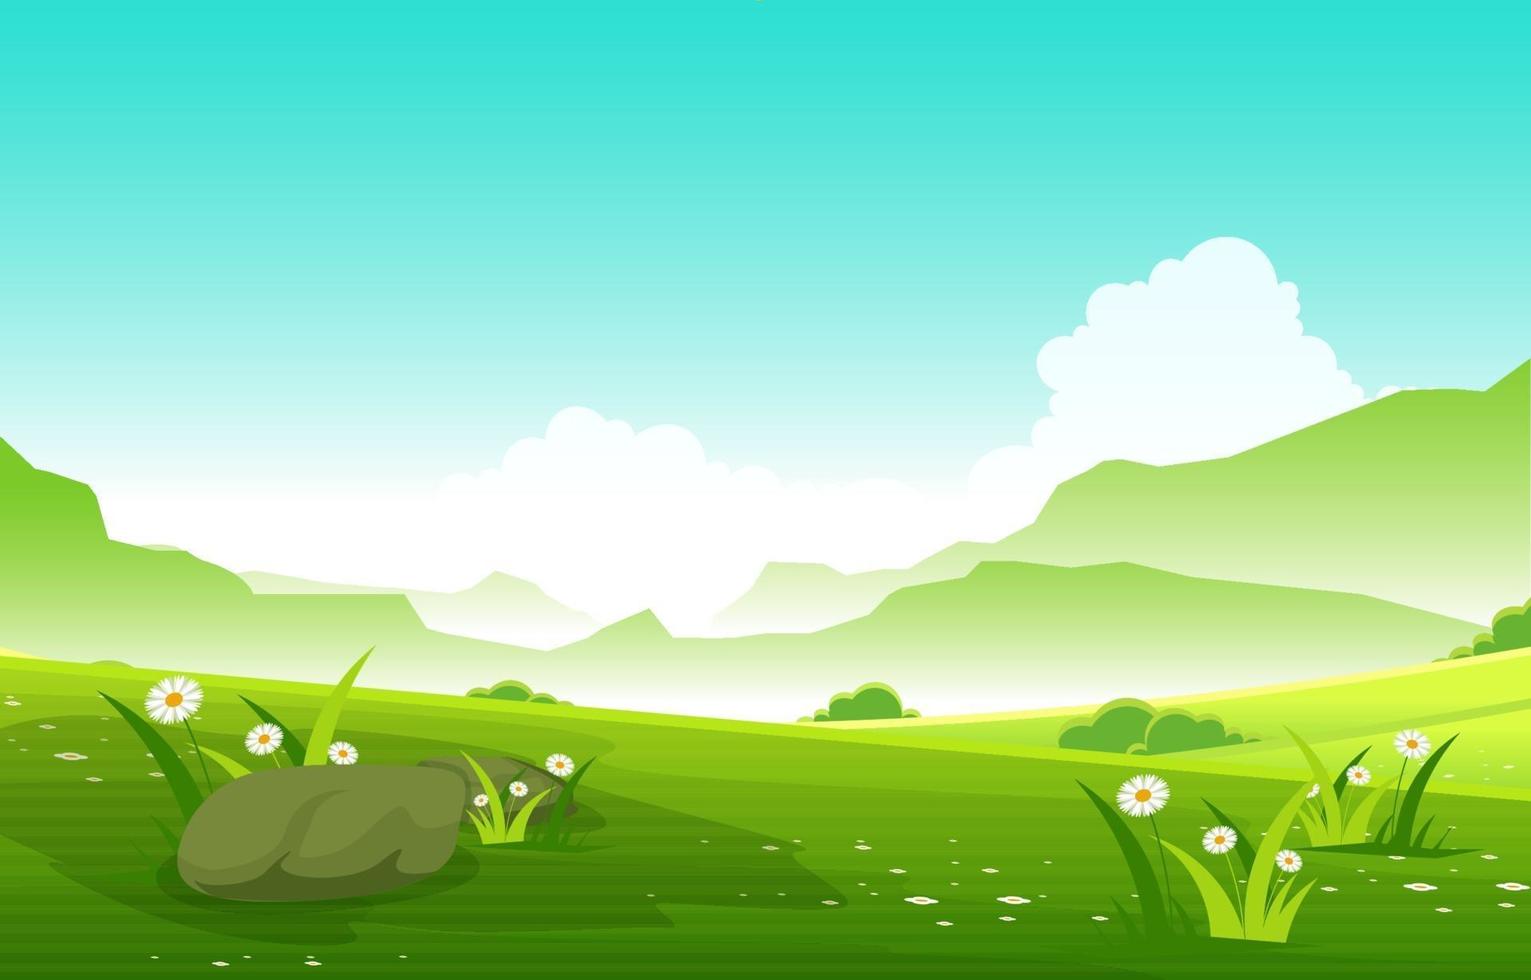 Summer Scene with Green Field and Blue Sky Illustration vector